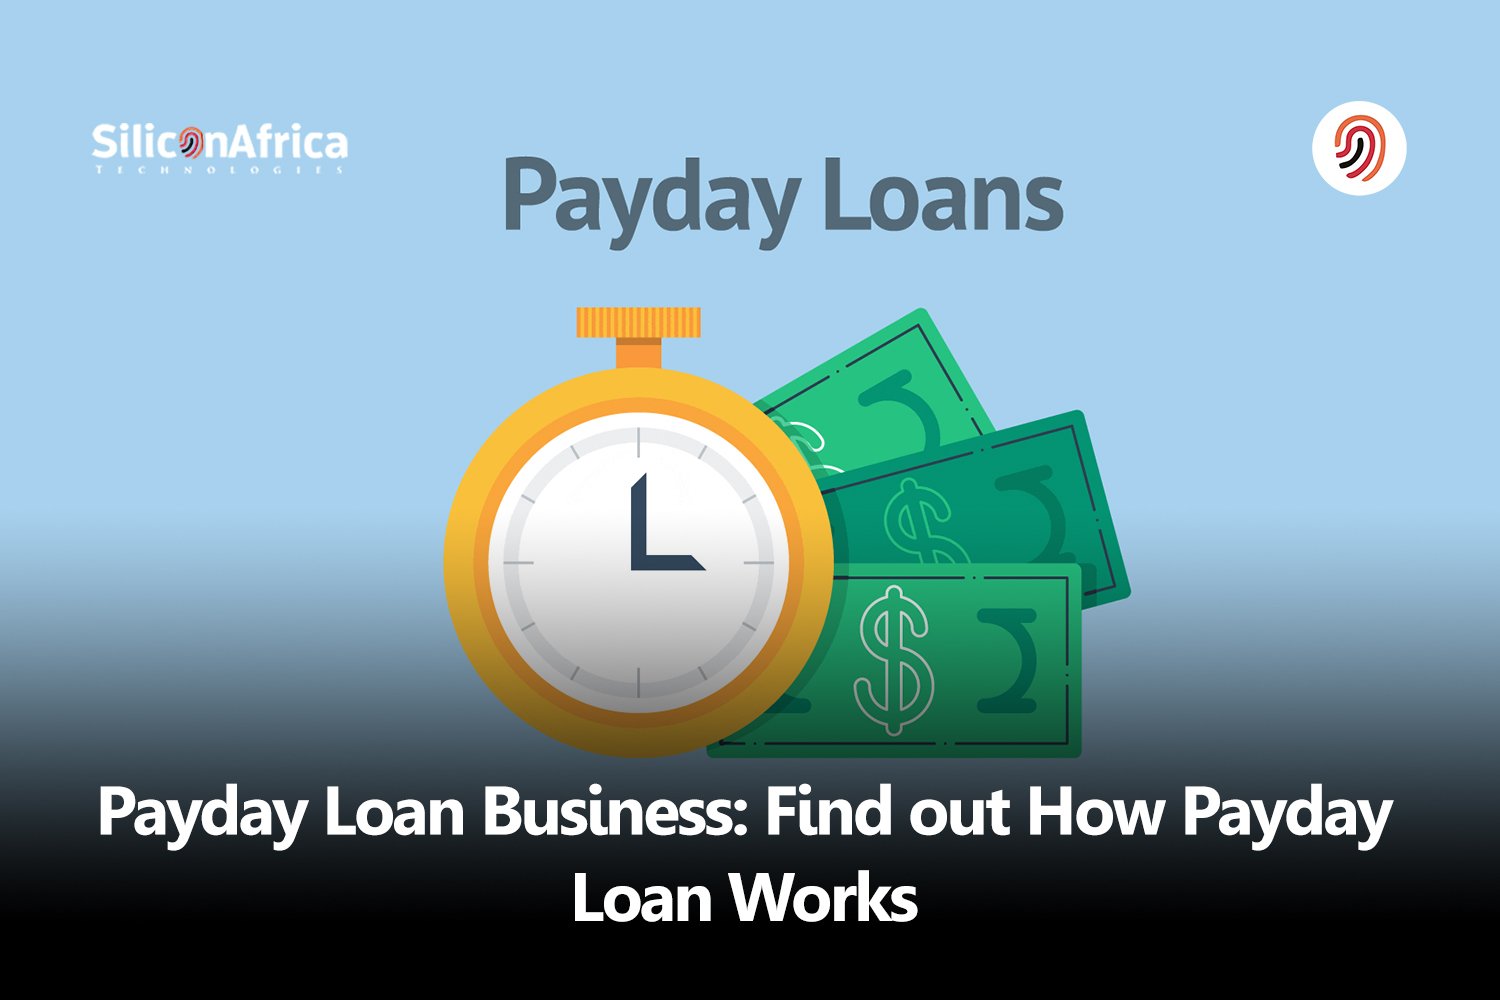 PAYDAY LOAN